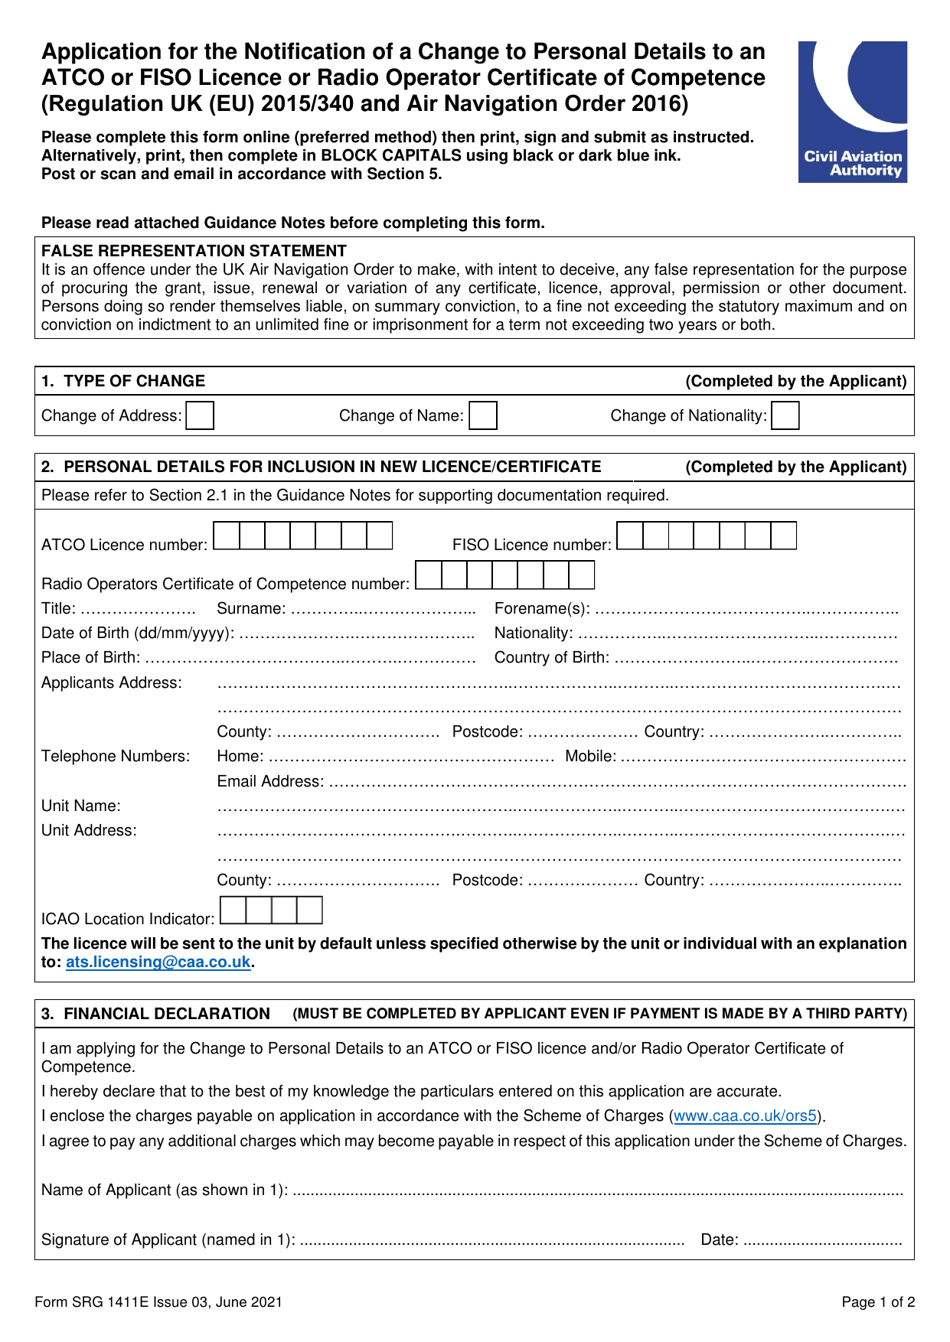 Form SRG1411E Application for the Notification of a Change to Personal Details to an Atco or Fiso Licence or Radio Operator Certificate of Competence - United Kingdom, Page 1